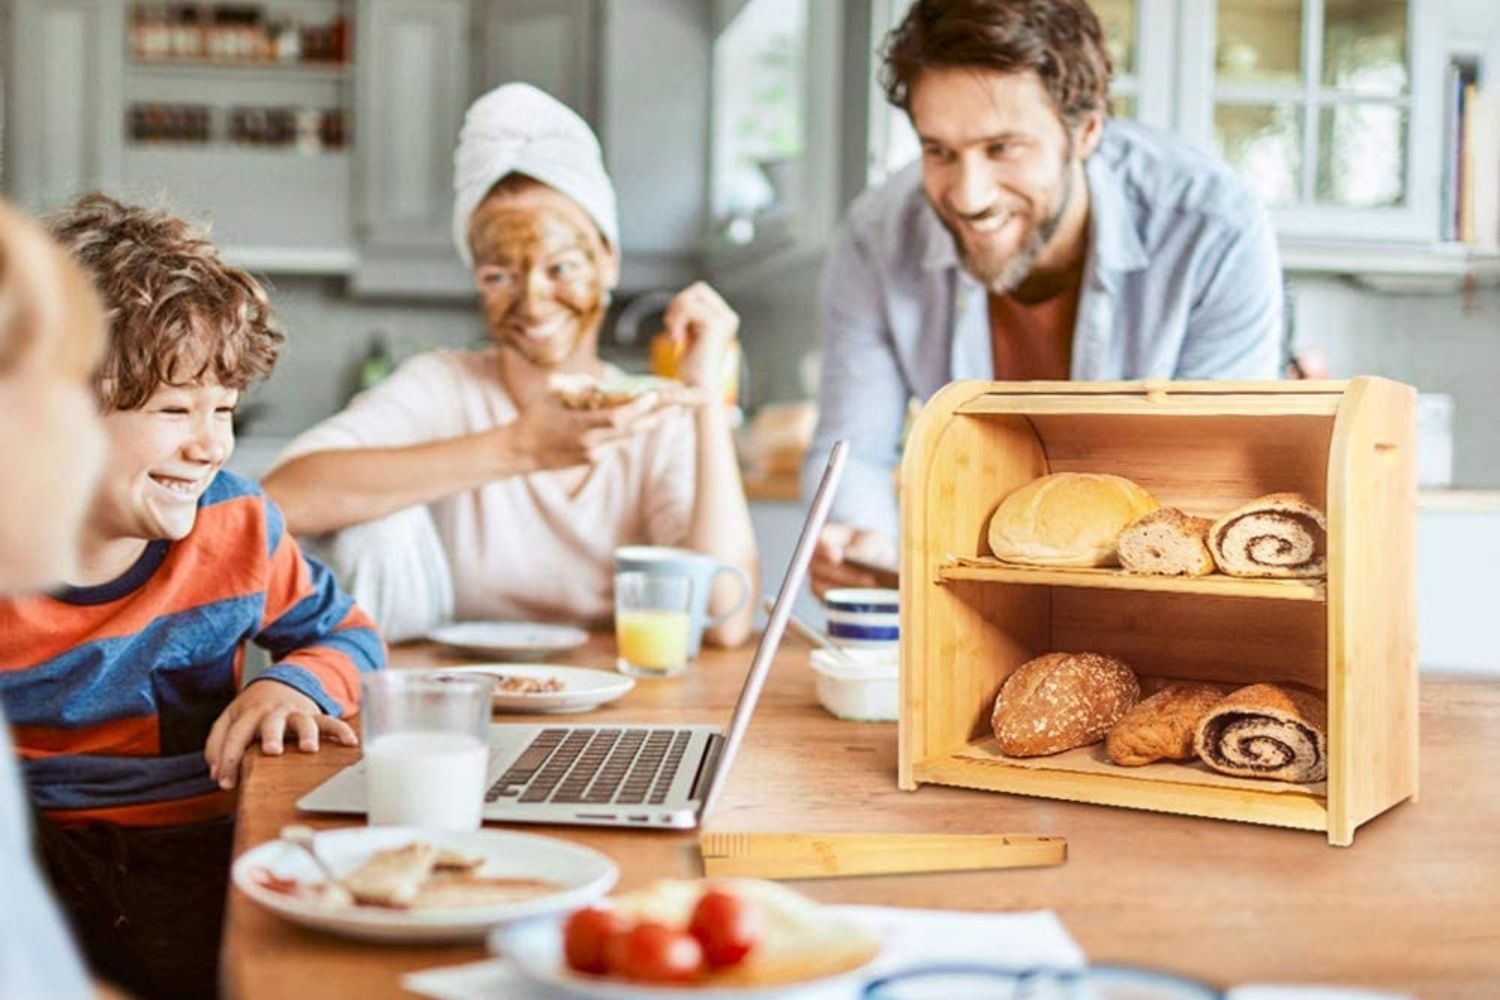 A family gathered at a kitchen counter with a laptop, breakfast items, and a bread box full of bread.